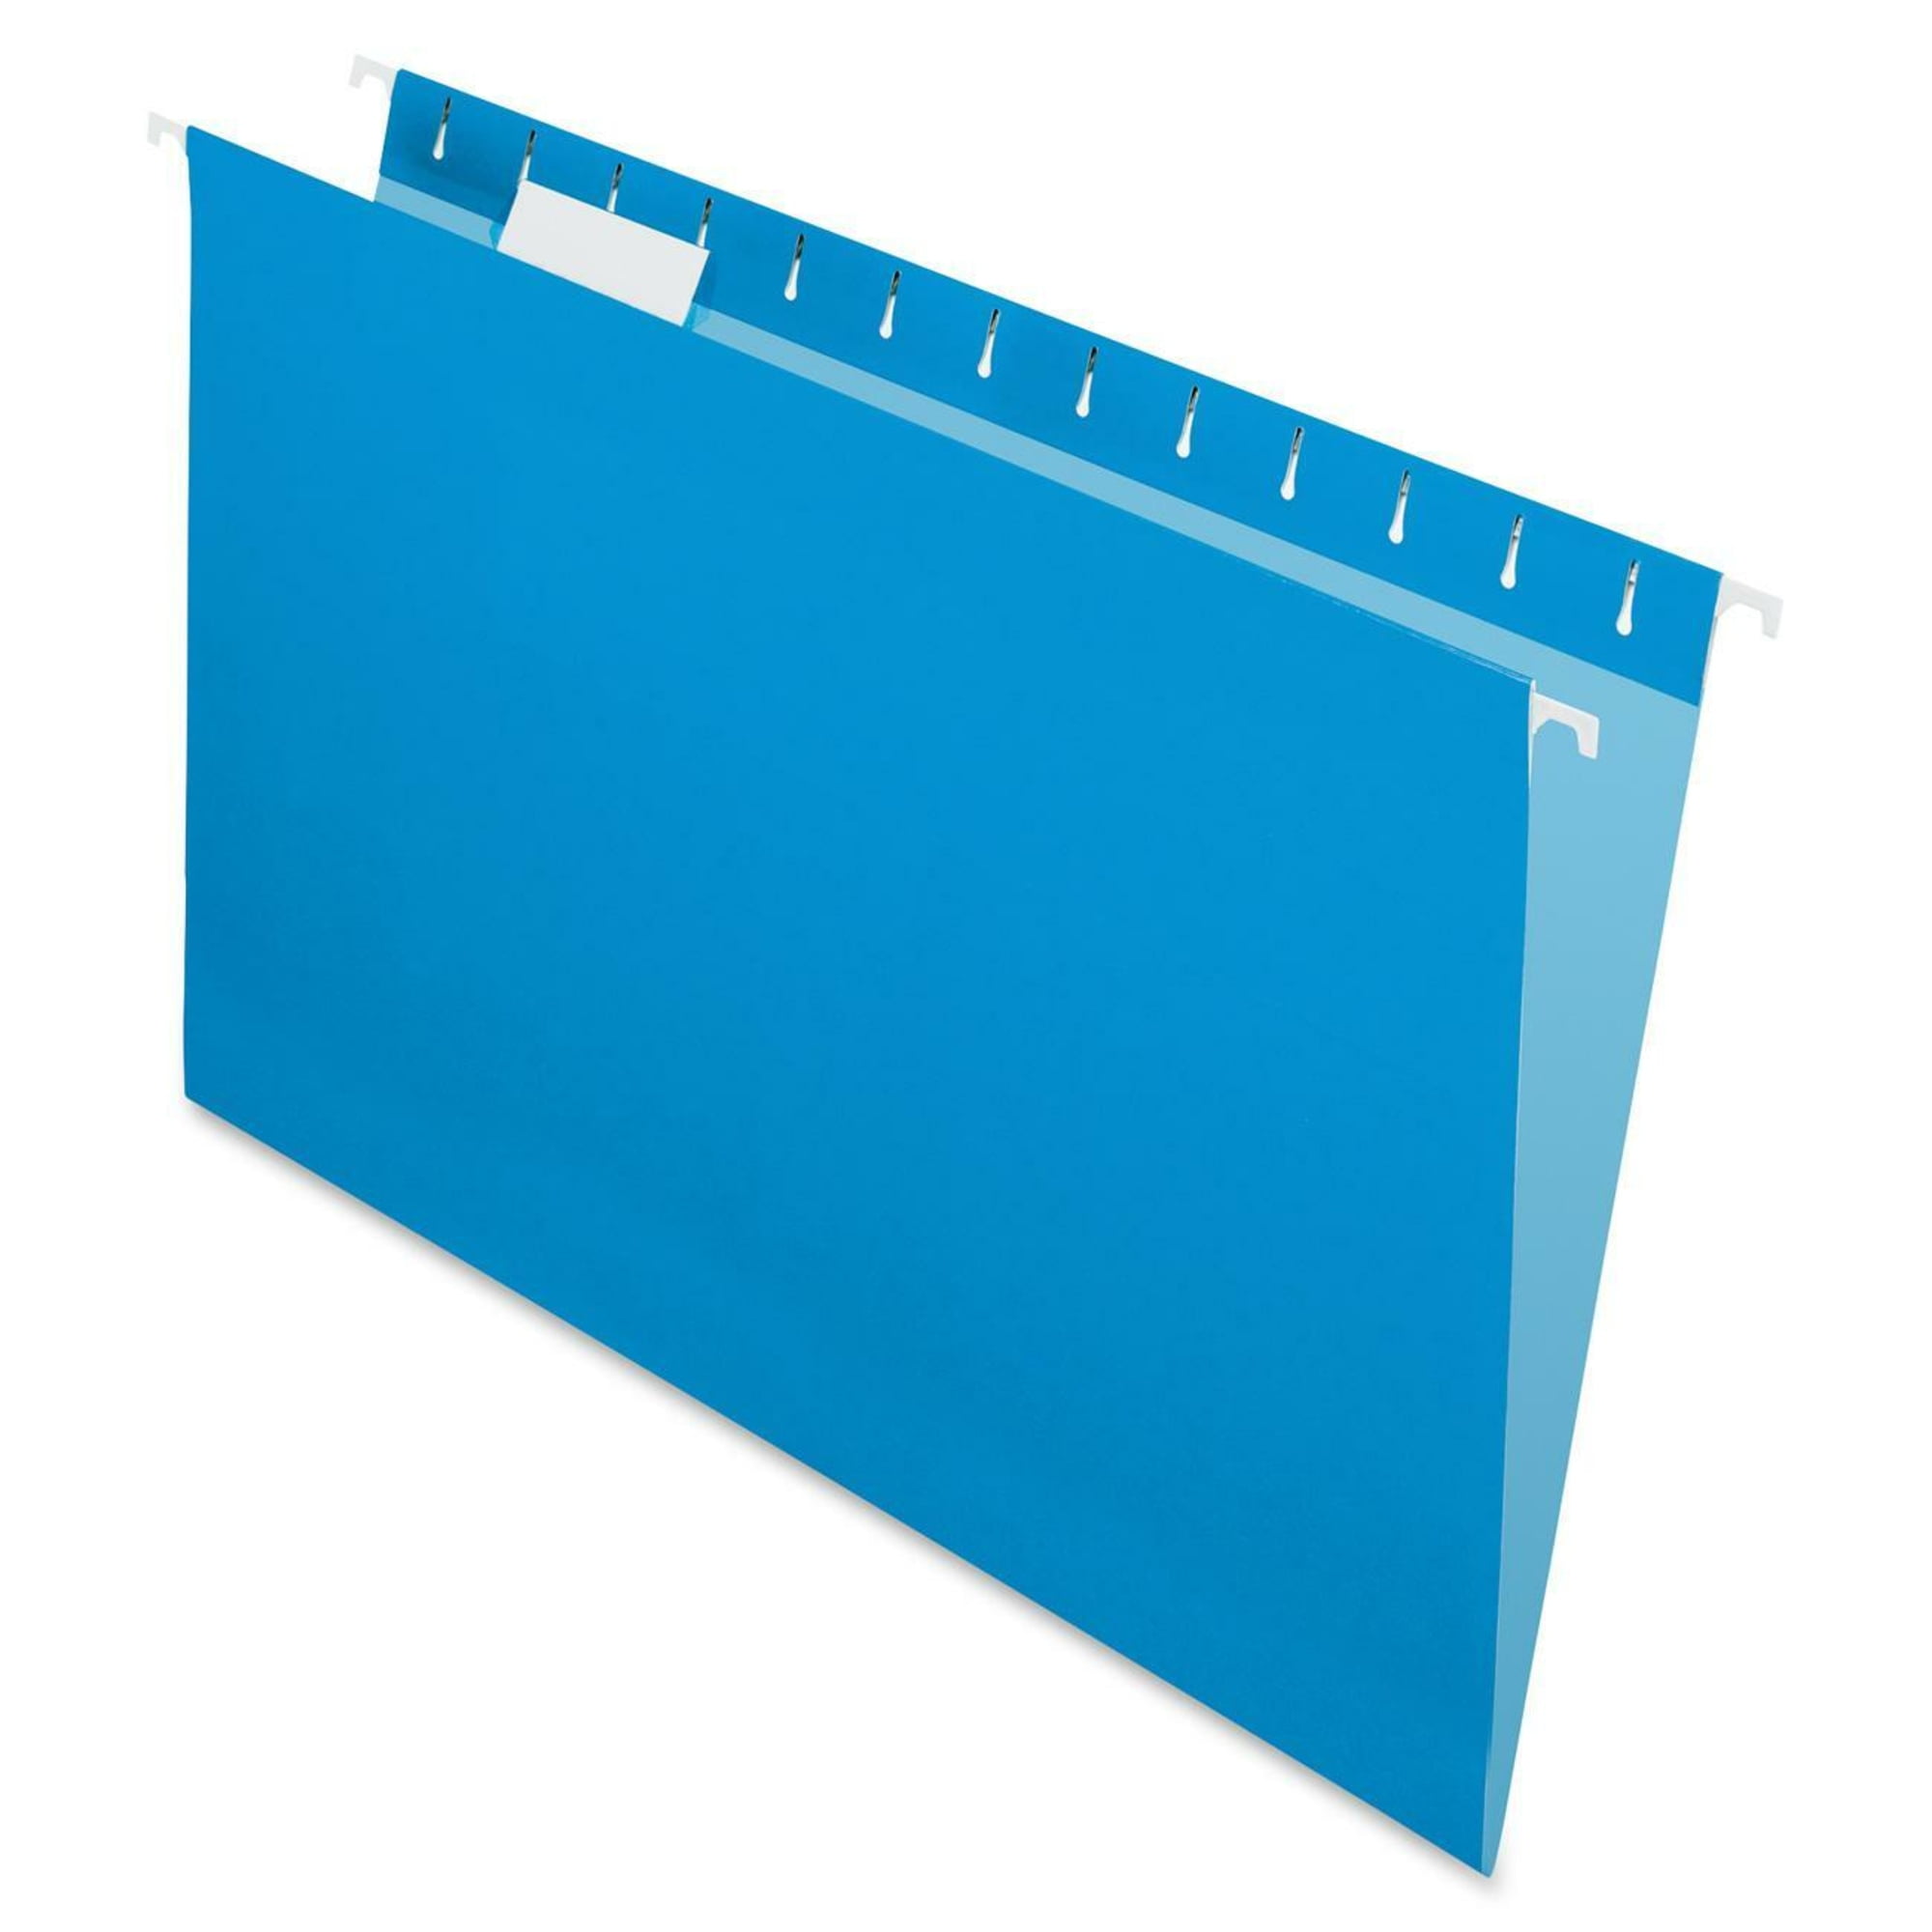 25 Hanging Folder Tabs Inserts for Organize and Distinguish Hanging Files 